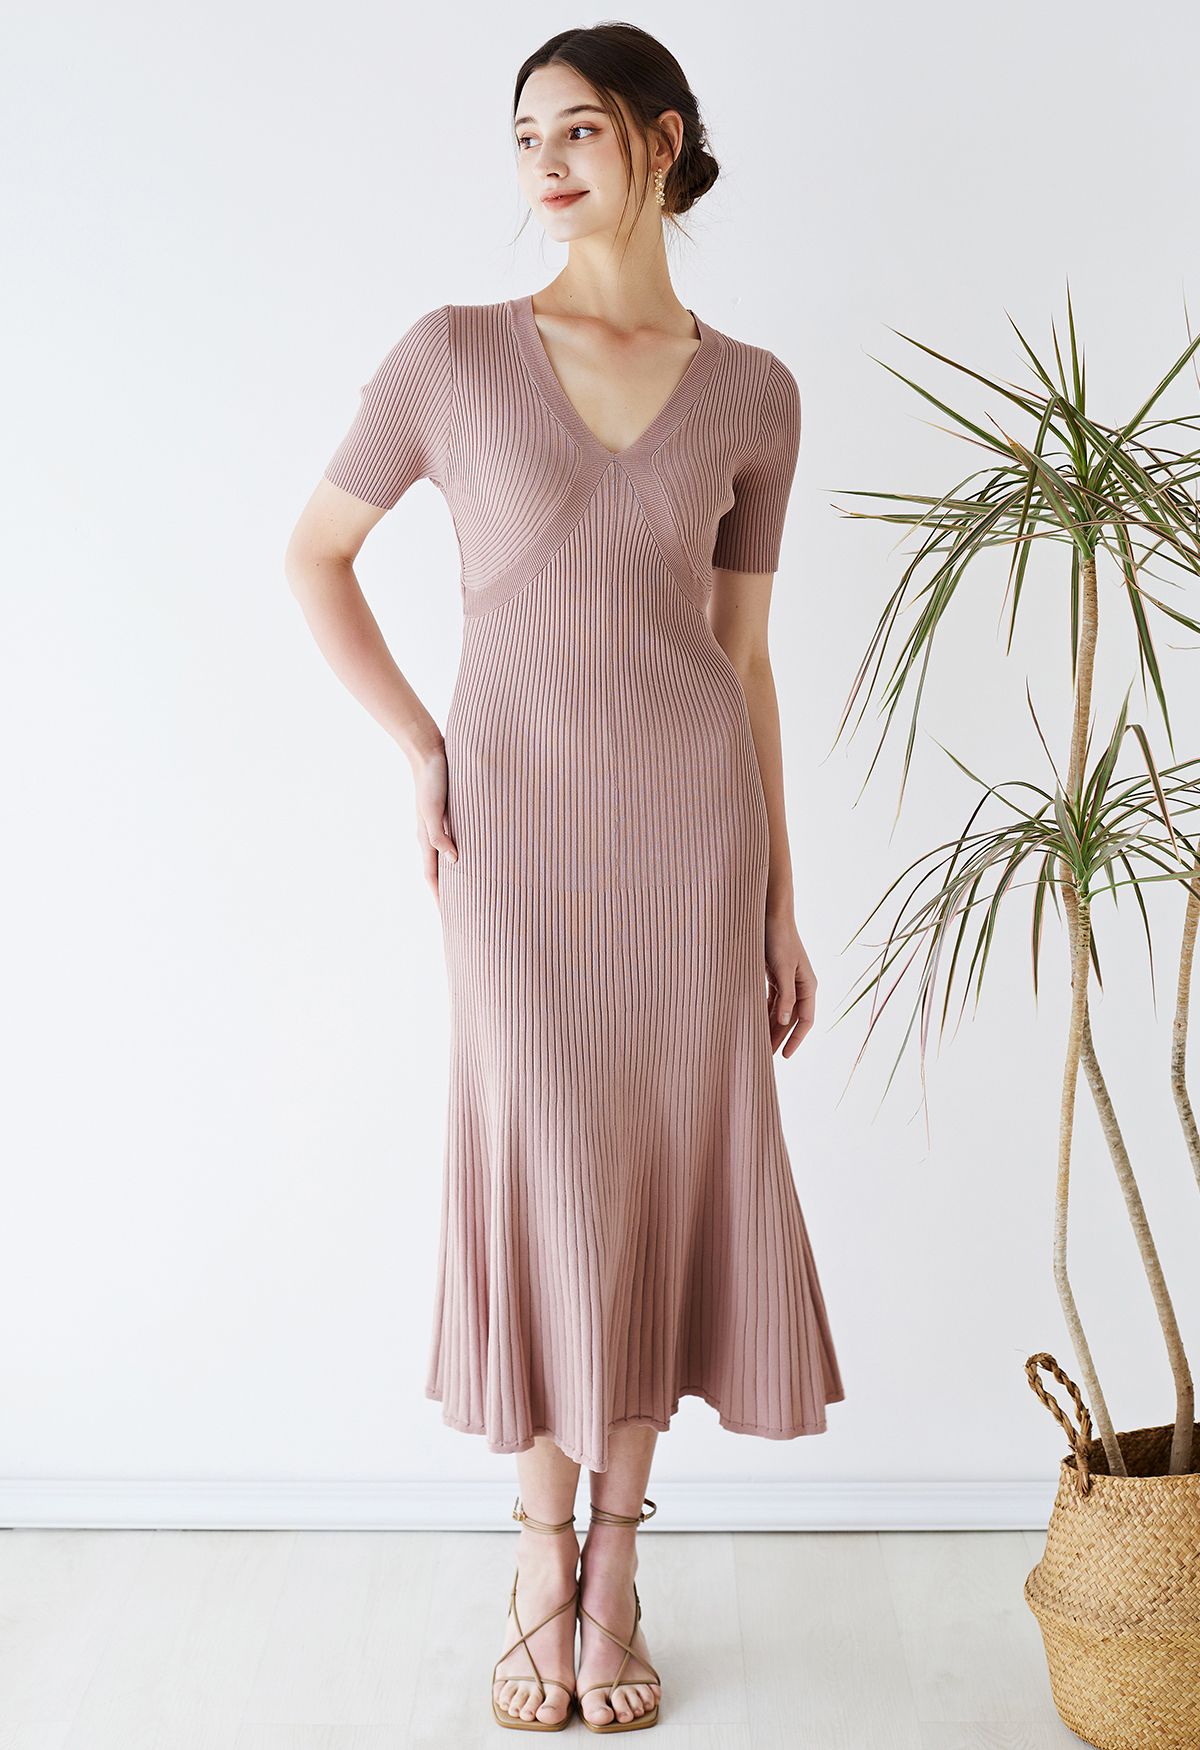 V-Neck Short Sleeve Ribbed Knit Dress in Dusty Pink